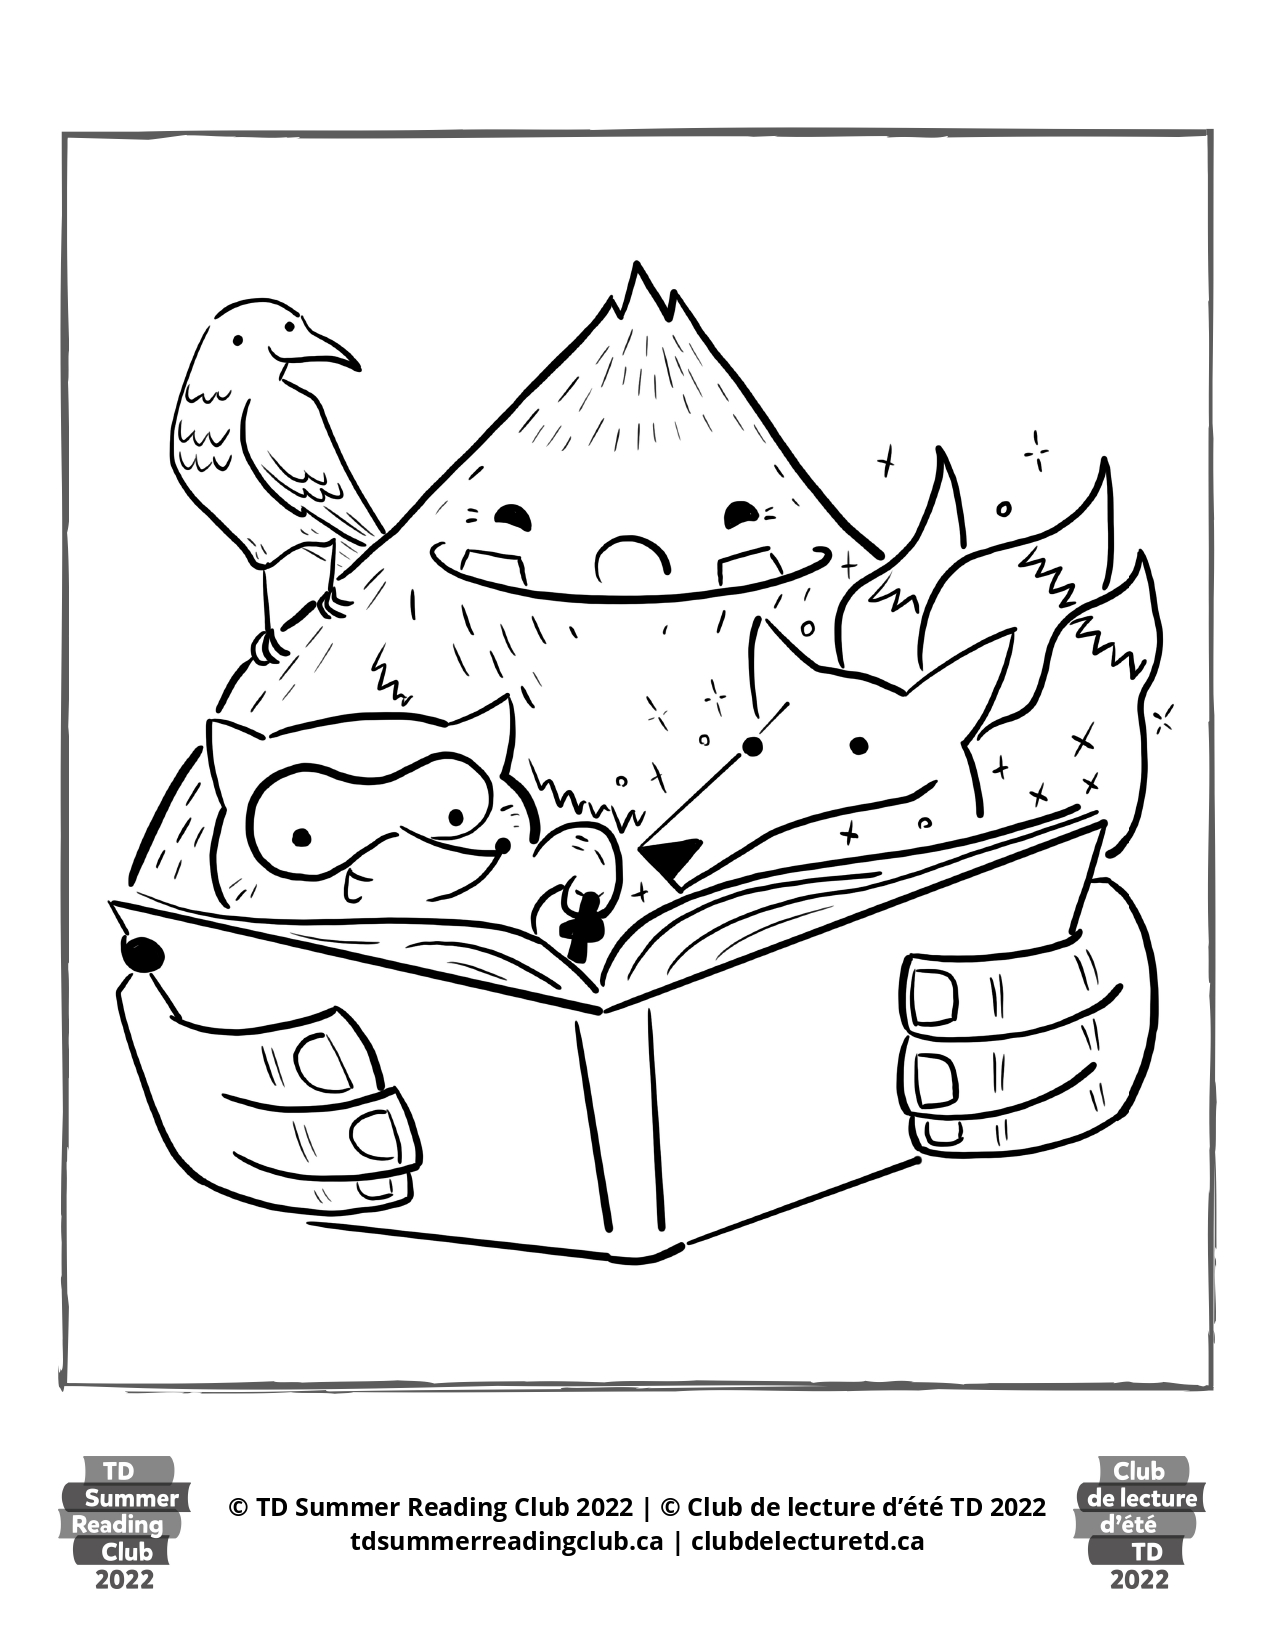 Colouring contest page animals reading